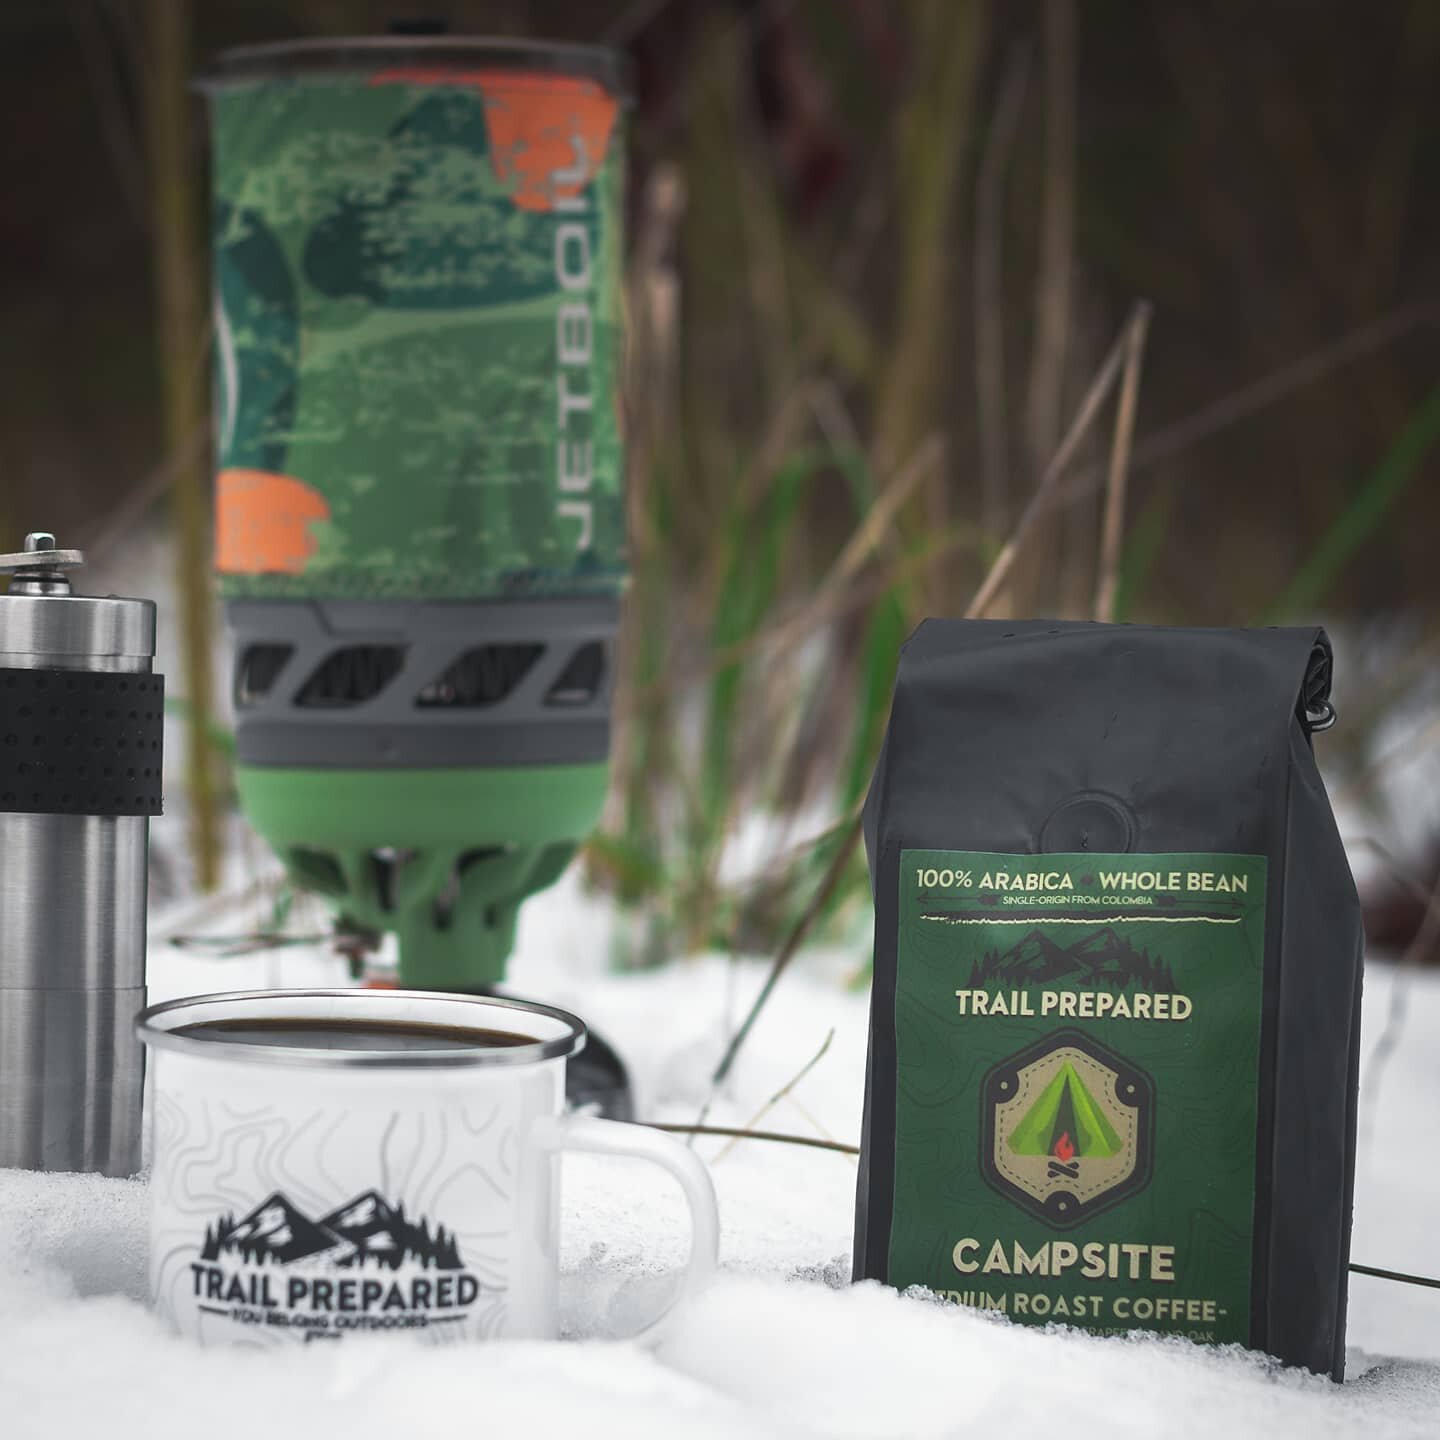 The perfect cup of coffee to warm you up in the cold! ❄️☕
-
-
-
-
-
#TrailPrepared #YouBelongOutdoors #Coffee #Campsite #CampsiteCoffee #EnamelMug #EnamelTopoCampMug #Outdoors #Snow #Snowing #Cold #Winter #ColdWeather #HotCoffee #MotherNature #GreatO